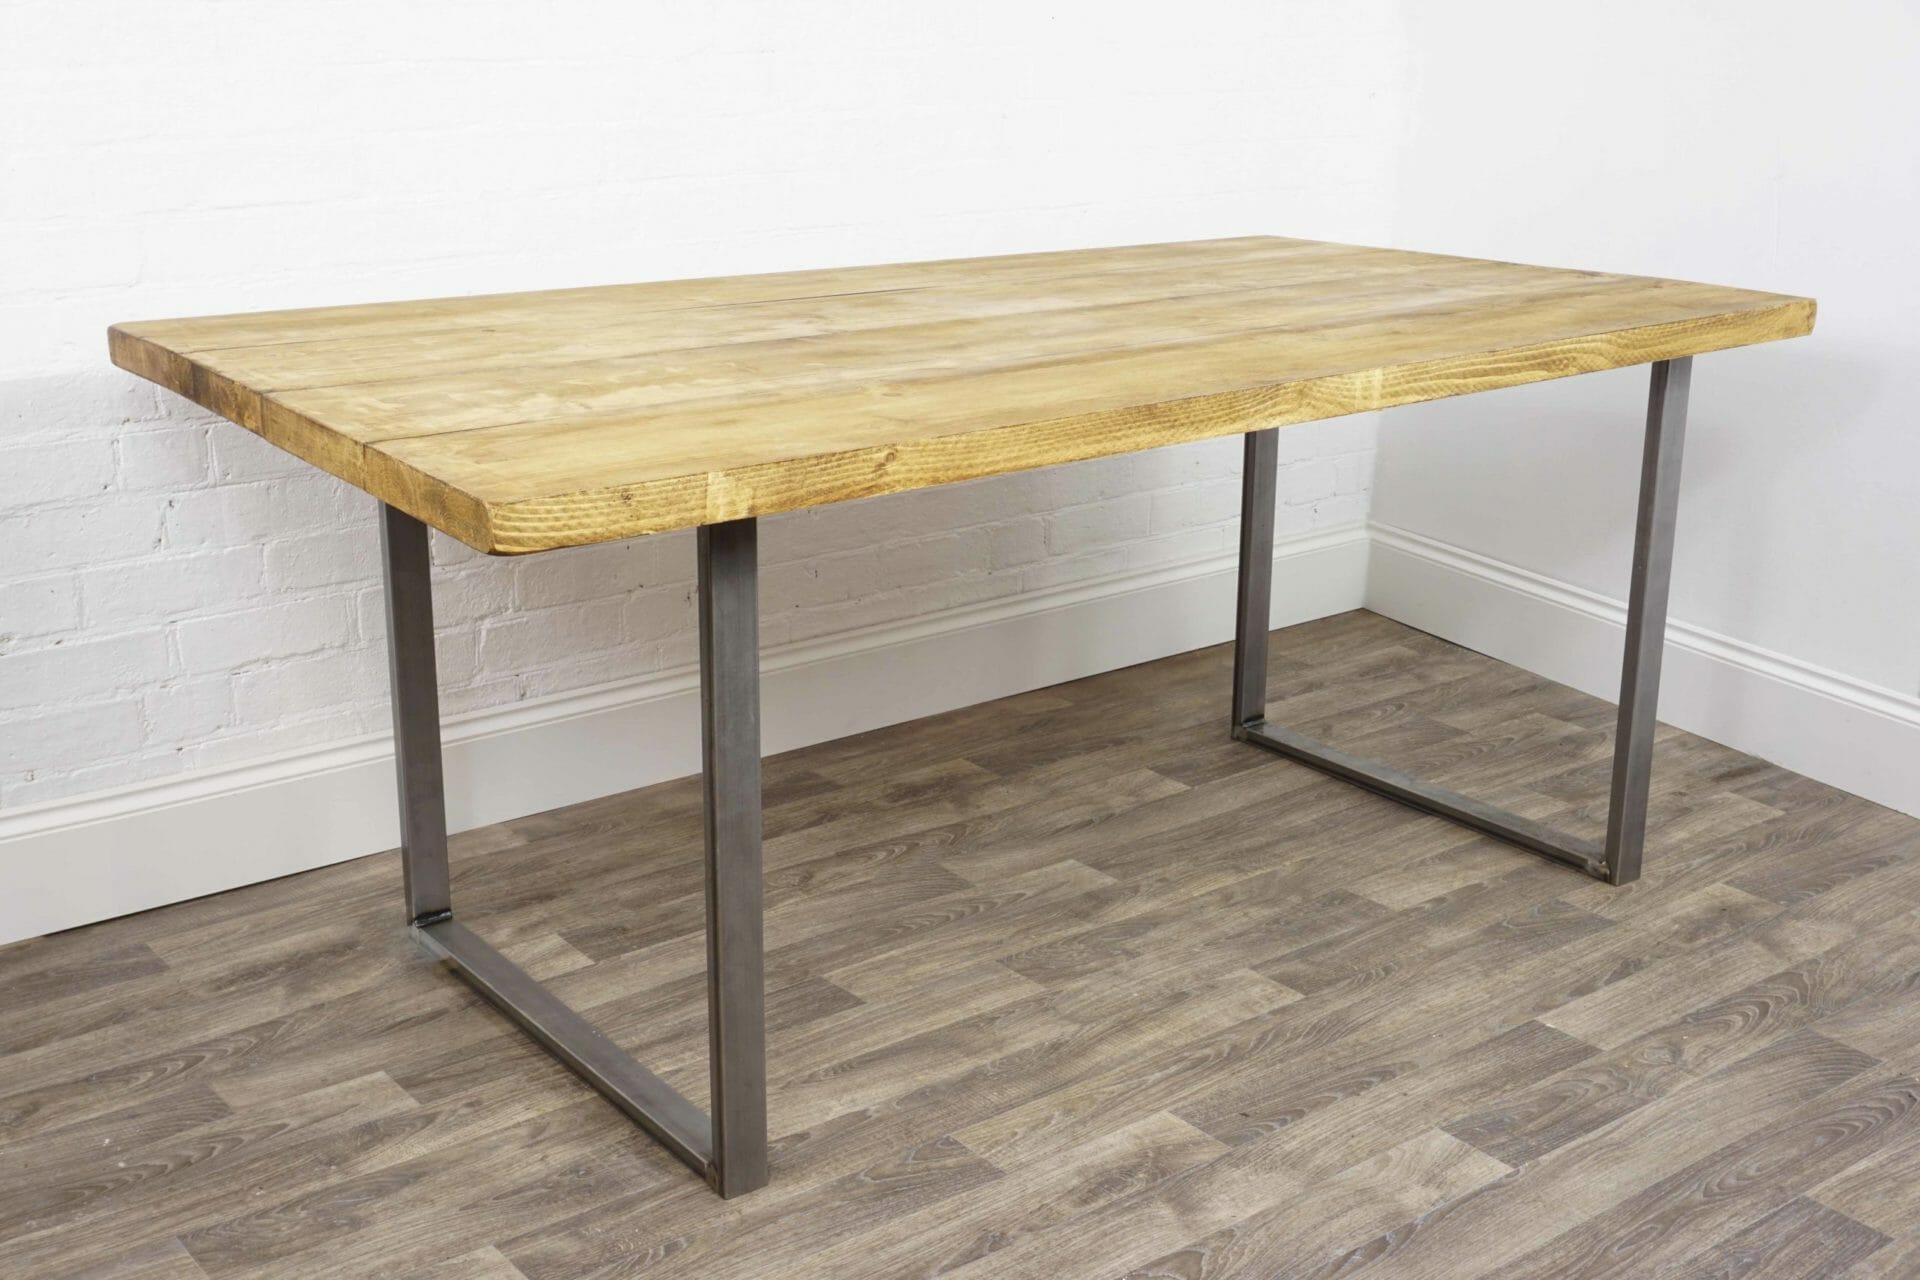 Reclaimed wooden kitchen table with raw steel legs